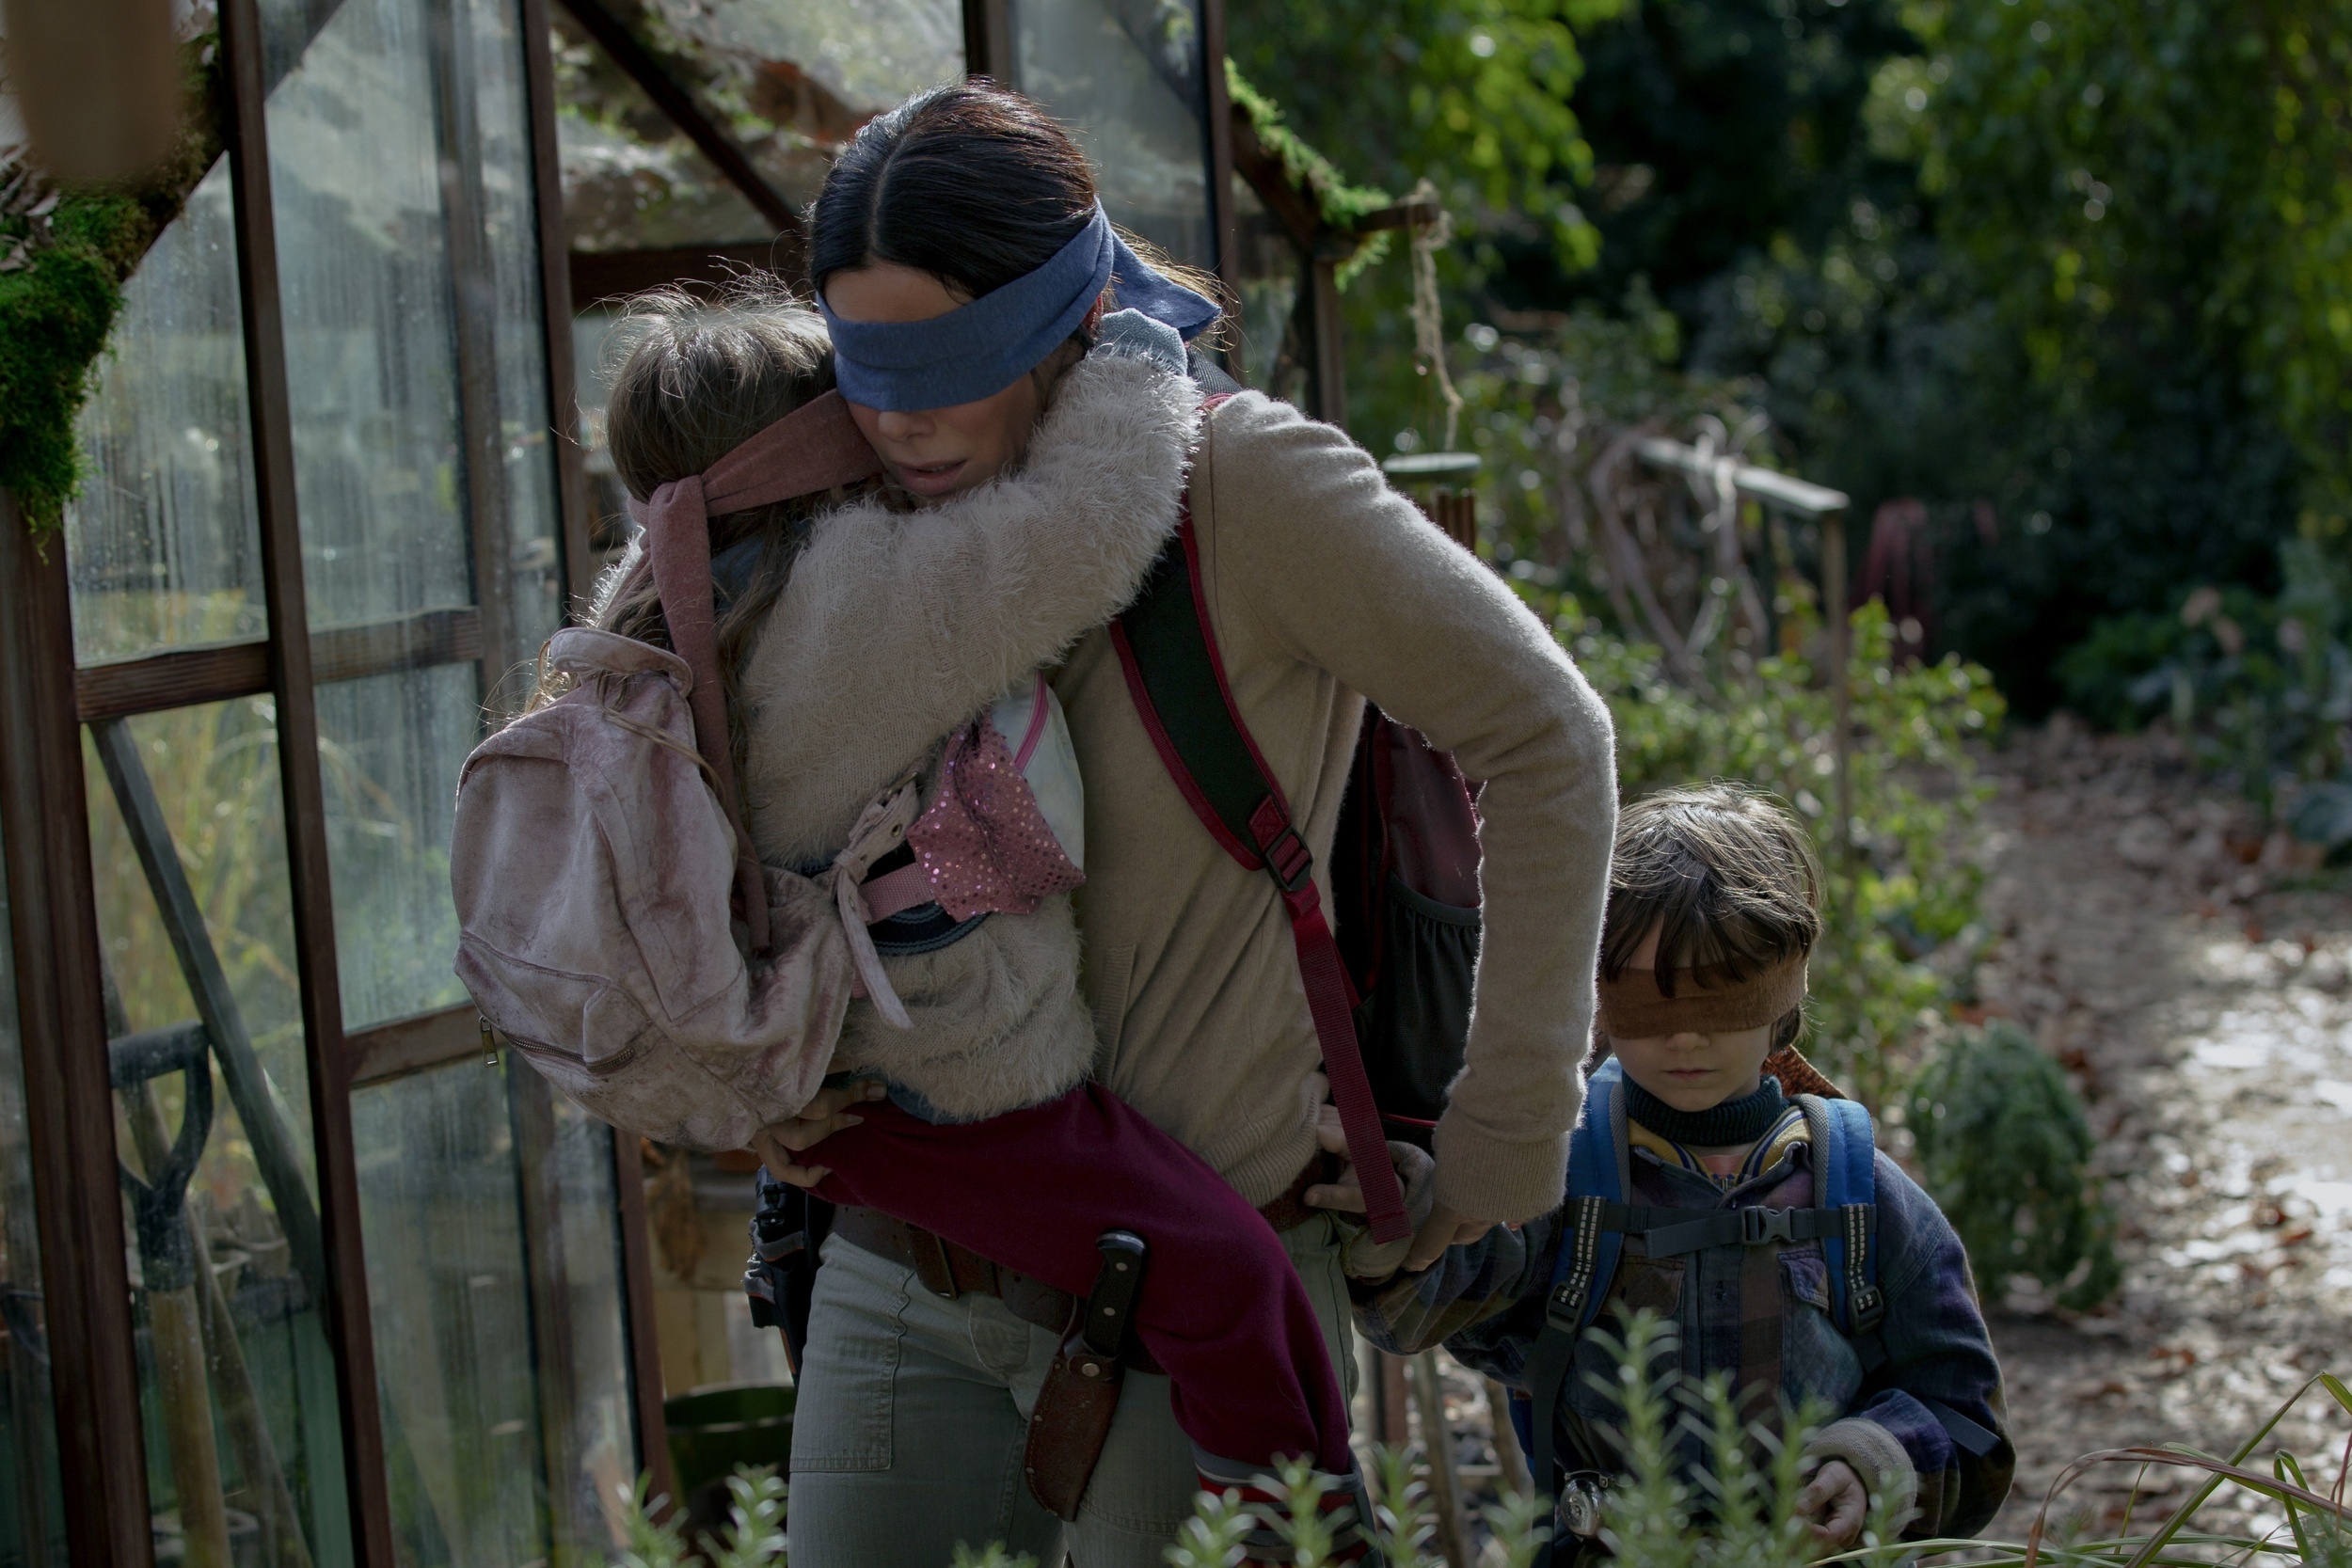 <p>2018’s horror-thriller <em>Bird Box is</em> one of Netflix’s most-watched movies ever and is a harrowing thrill ride. The post-apocalyptic tale sees humanity collapse after an unseen entity emerges and kills everyone who lays eyes on it. A mother and her two children must make it to safety but do so blindly. Sandra Bullock gives a reliably strong and emotional performance, and the film makes effective use of its intriguing concept. You, too, as a viewer, will not be able to look away.</p><p><a href='https://www.msn.com/en-us/community/channel/vid-cj9pqbr0vn9in2b6ddcd8sfgpfq6x6utp44fssrv6mc2gtybw0us'>Follow us on MSN to see more of our exclusive entertainment content.</a></p>